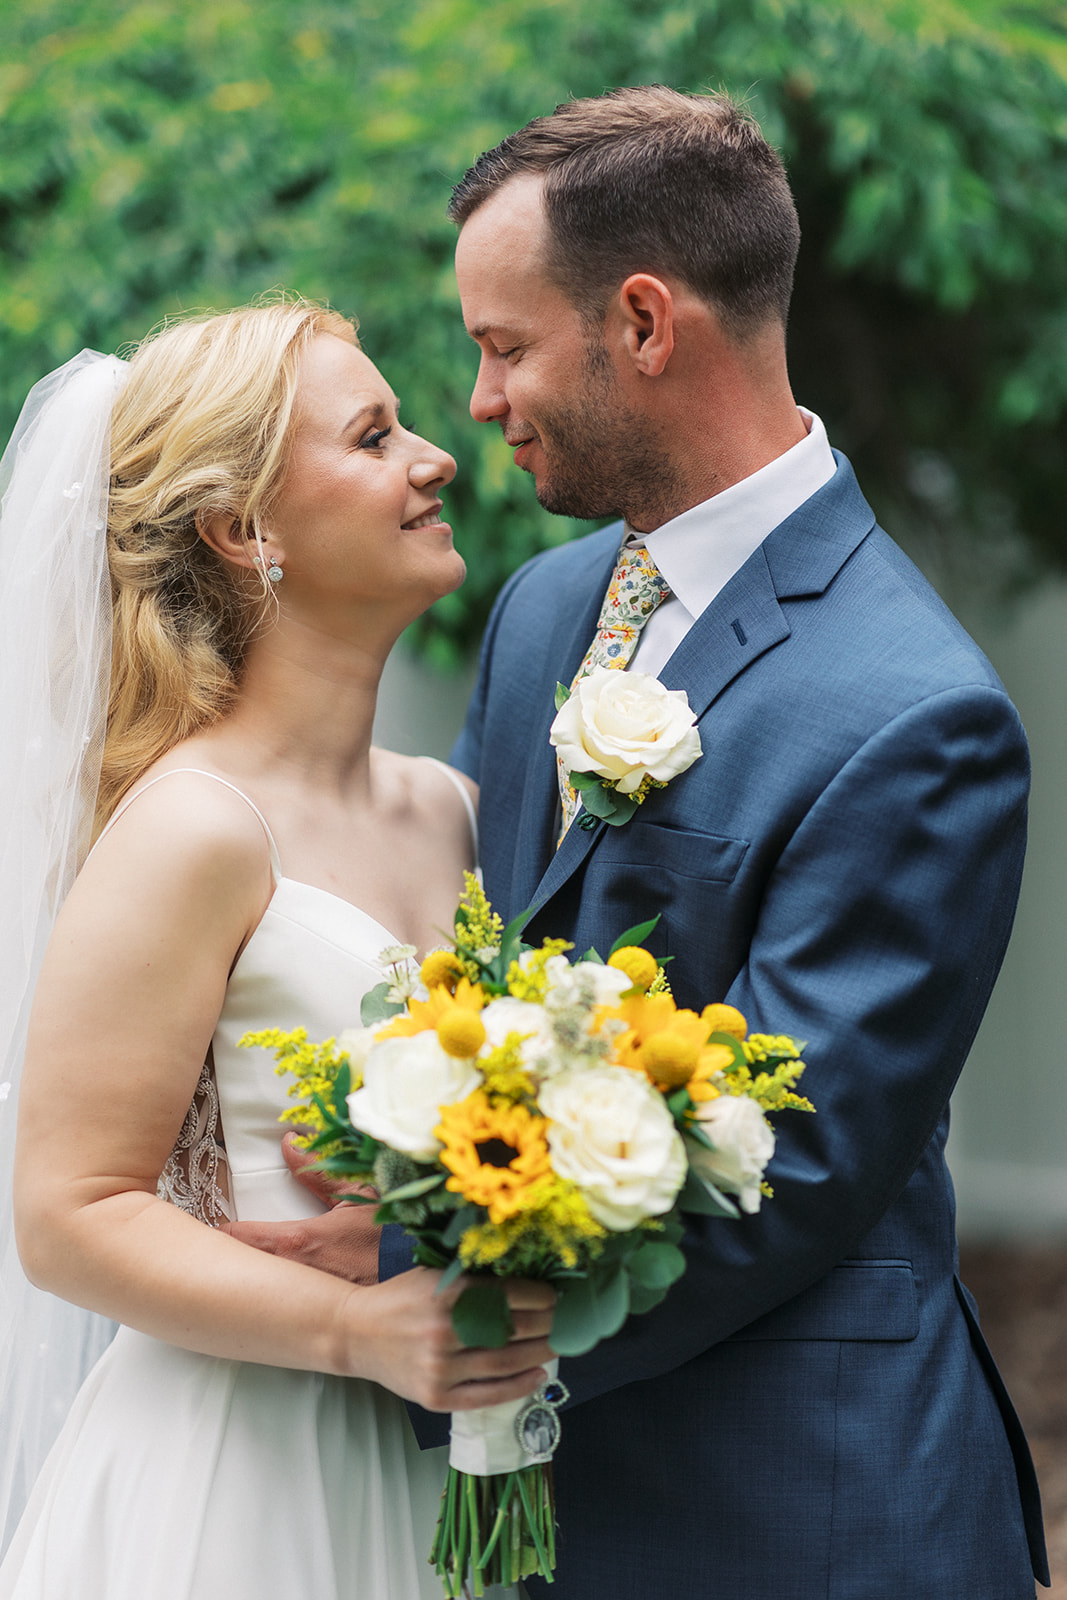 Newlyweds embrace and gaze into each other's eyes while the groom wears a blue suit and the bride holds her yellow and white bouquet at a Westmount Country Club Wedding